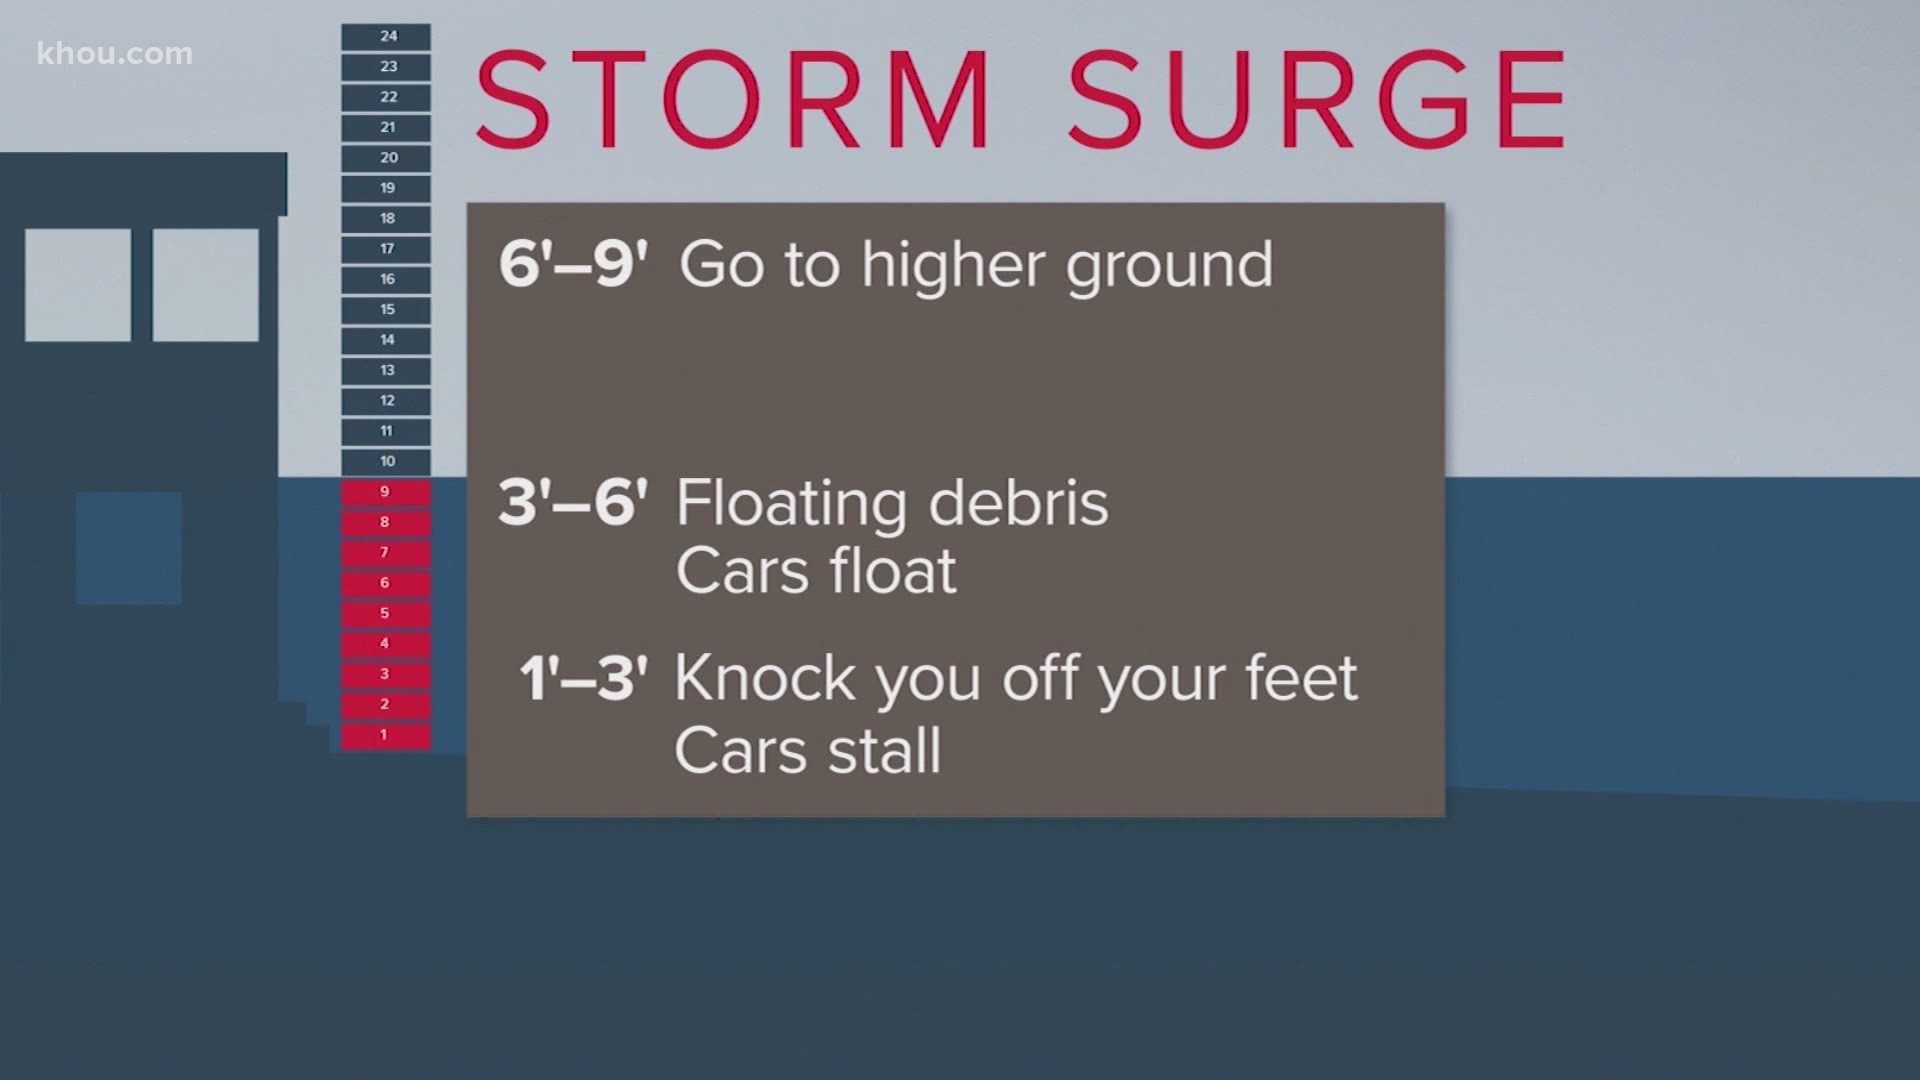 NHC officials explain that a storm surge happens when water is being pushed toward the shore by the force of the winds moving cyclonically around the storm.